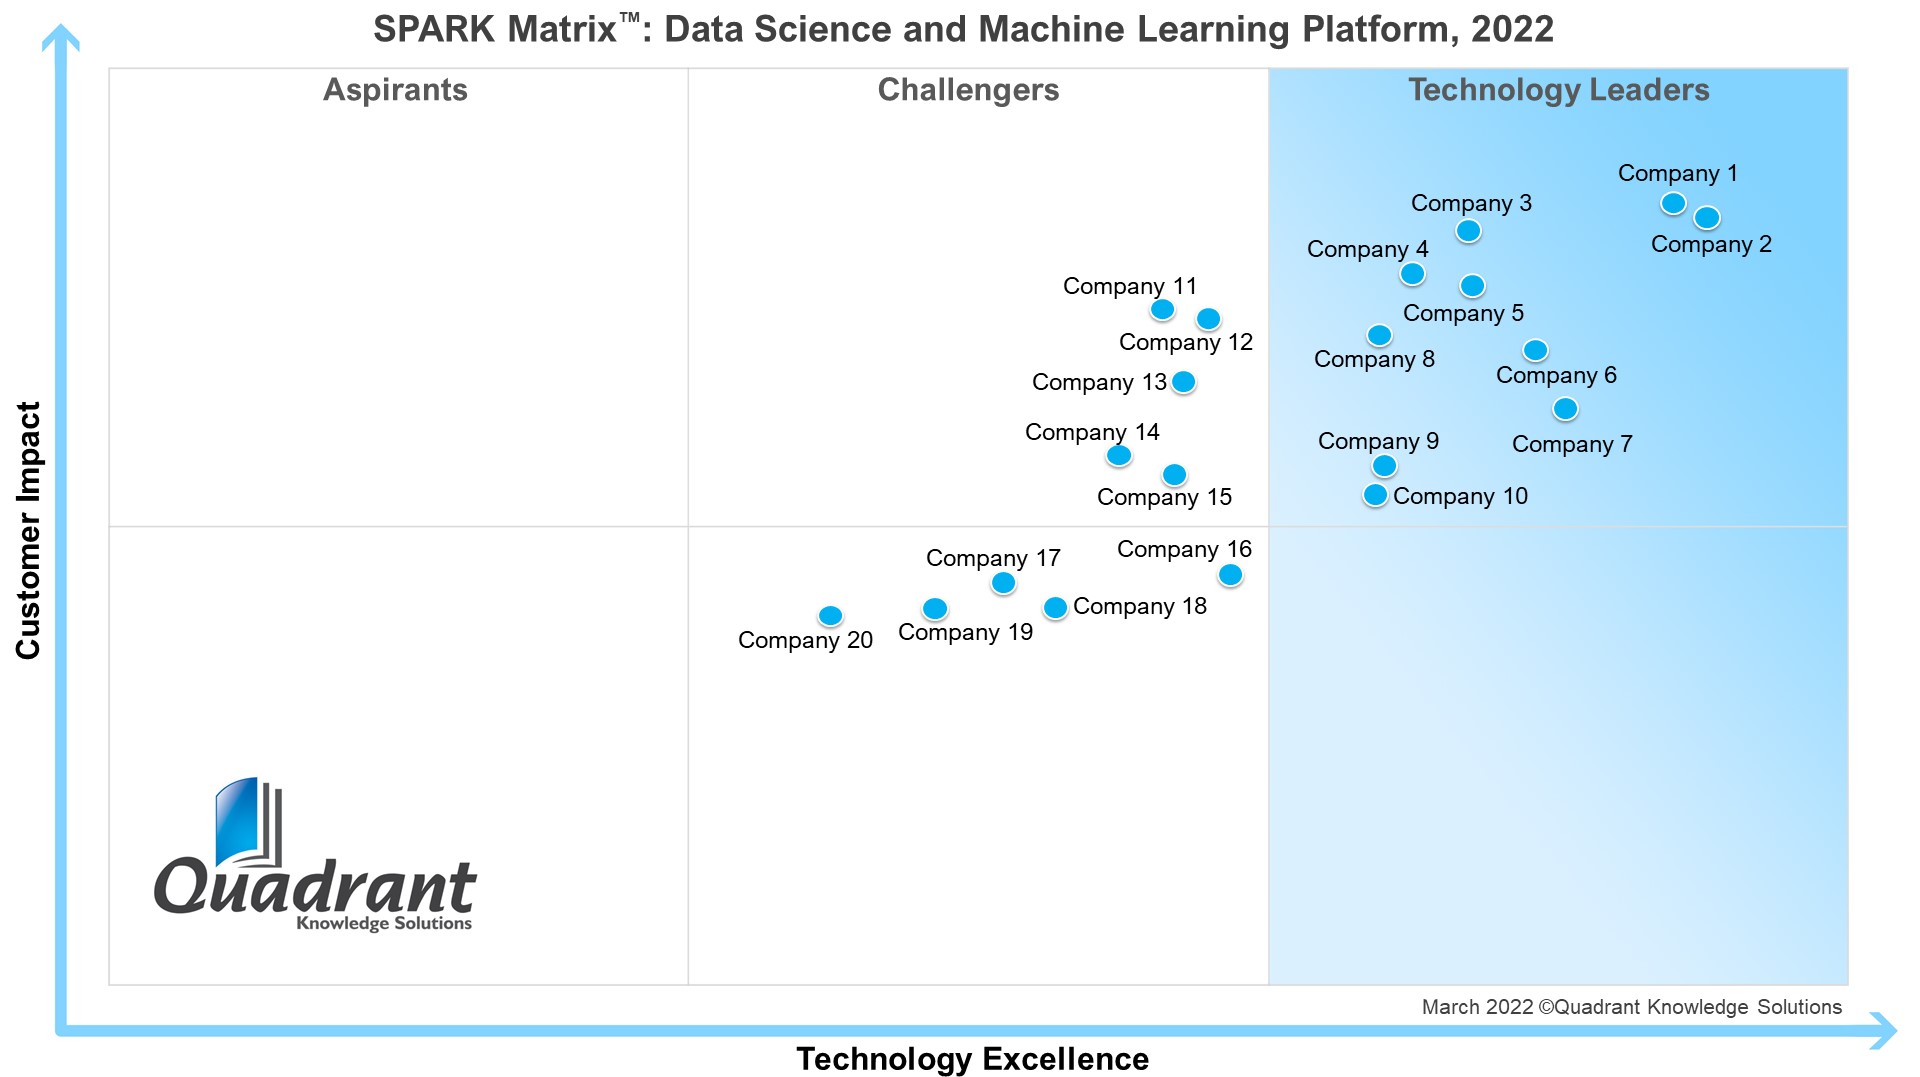 Data Science and Machine Learning_2022_Quadrant Knowledge Solutions